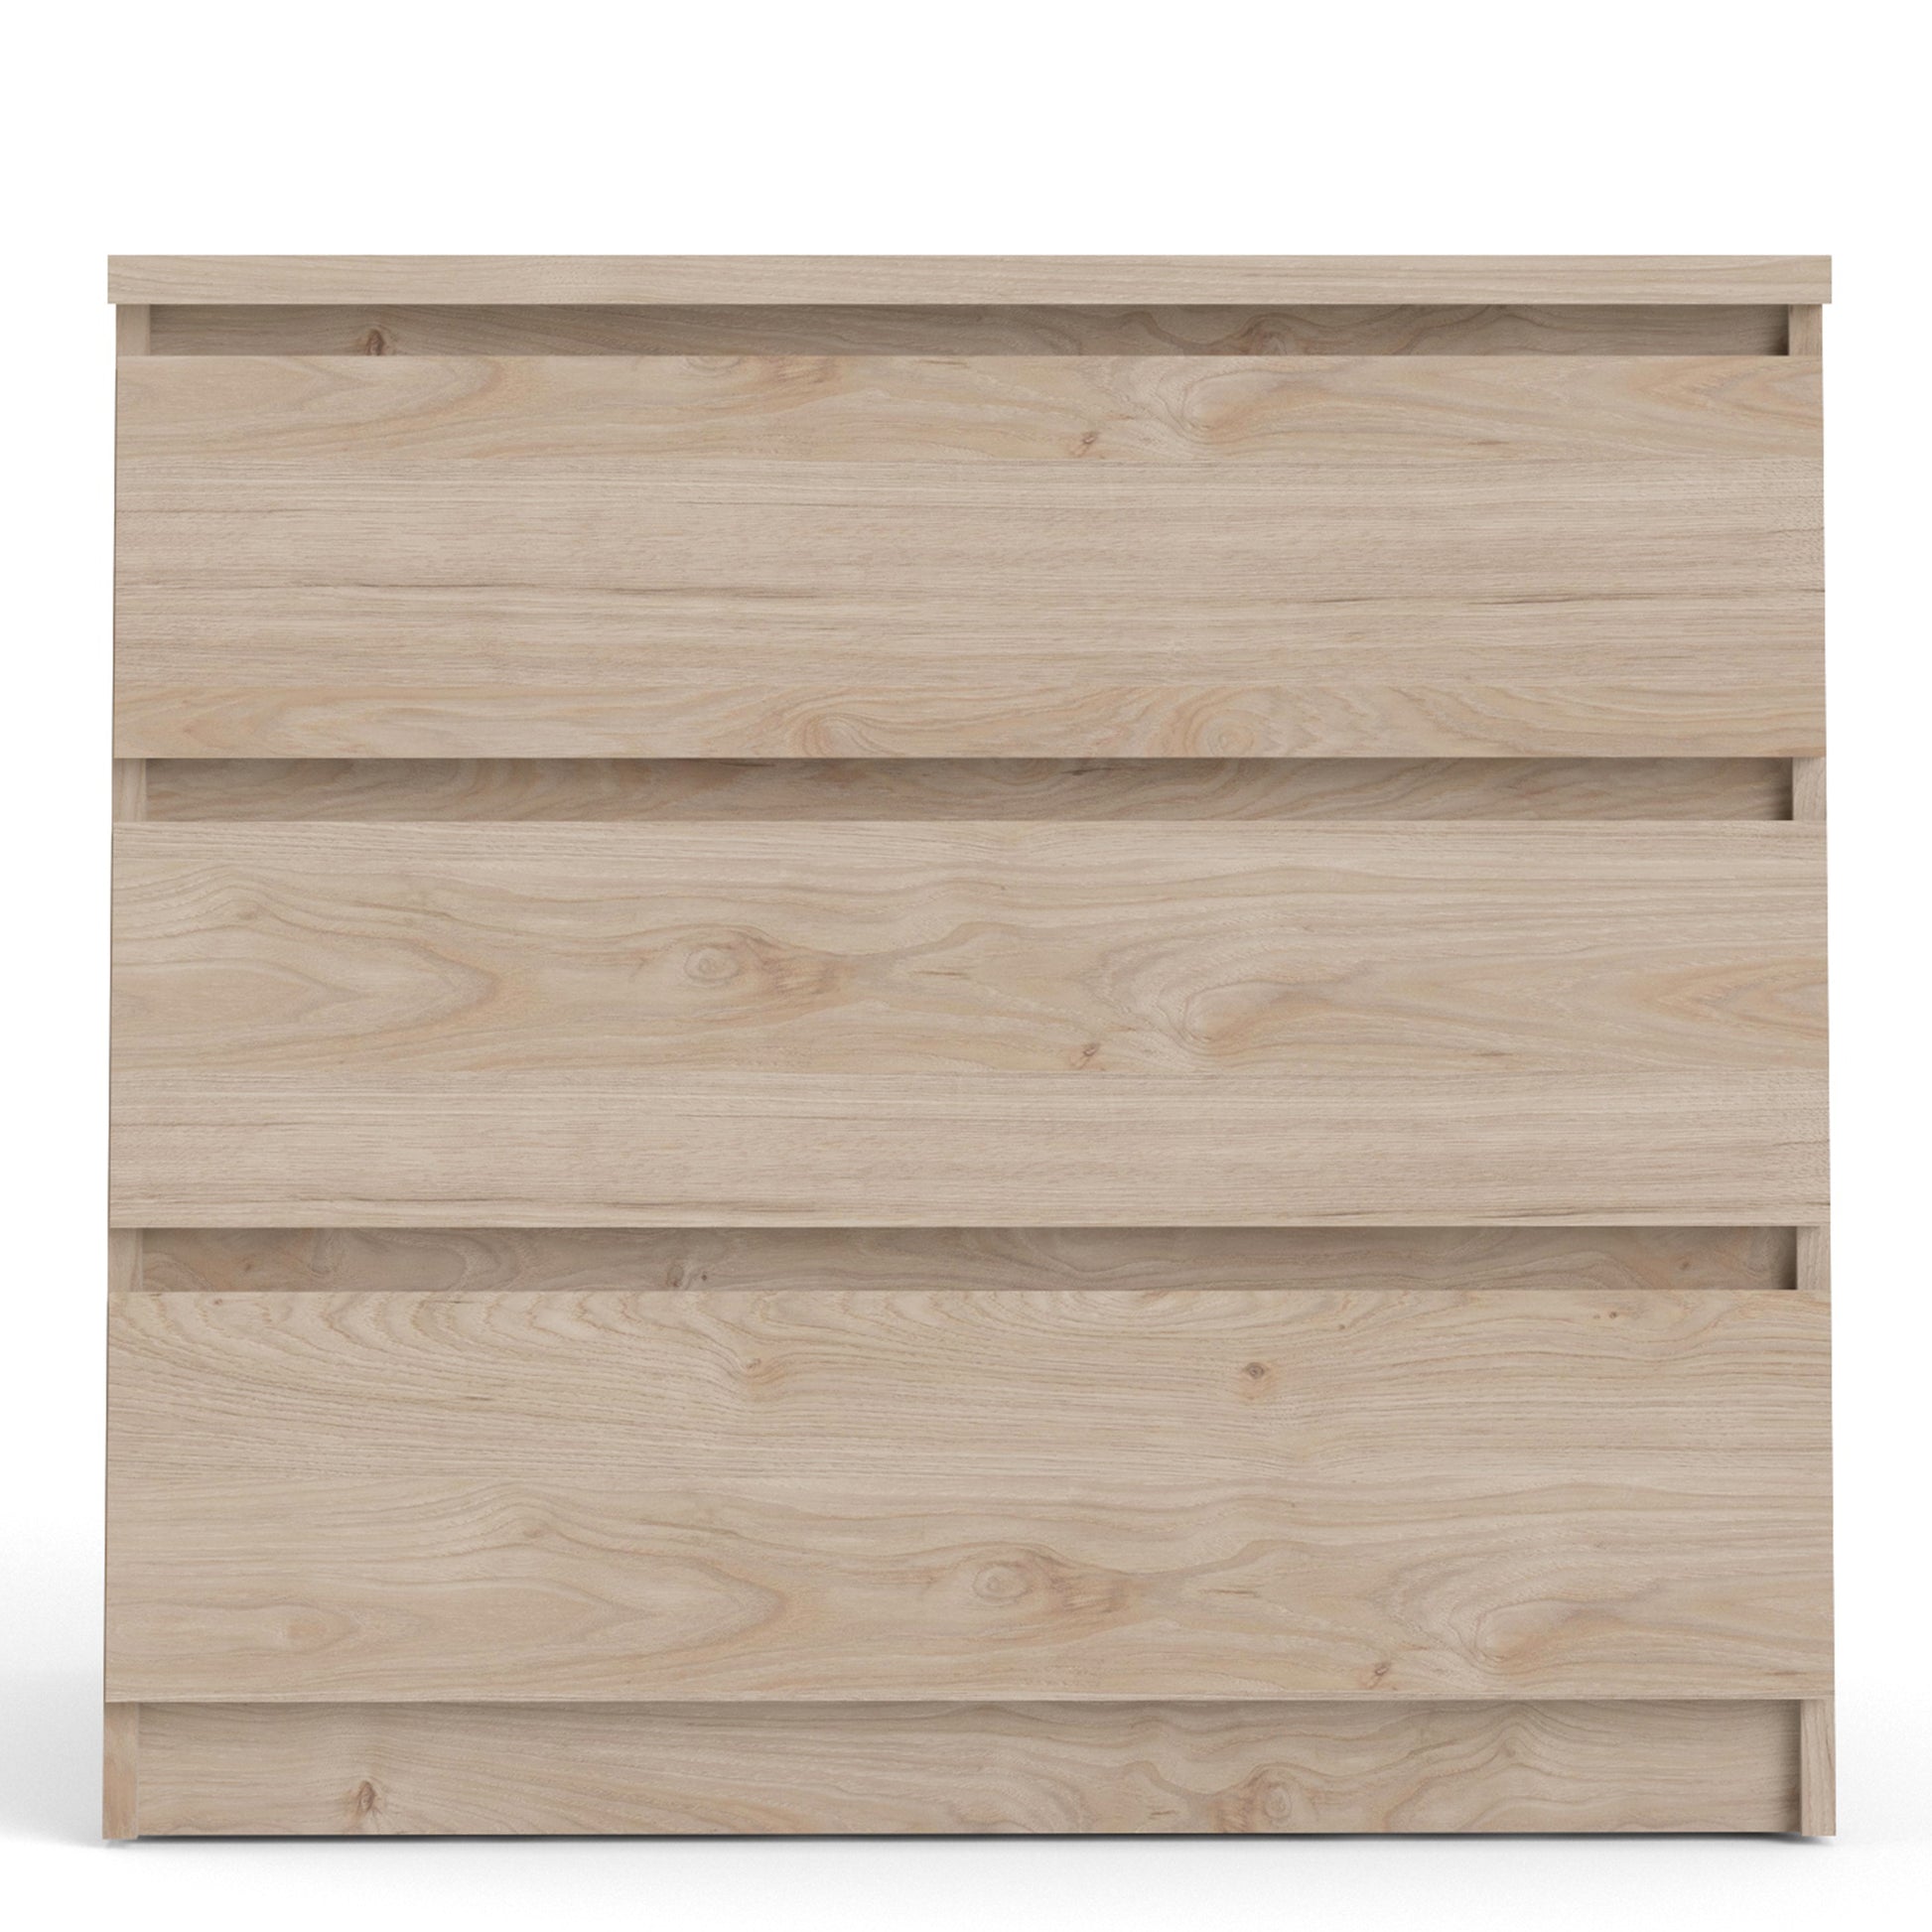 Naia  Chest of 3 Drawers in Jackson Hickory Oak